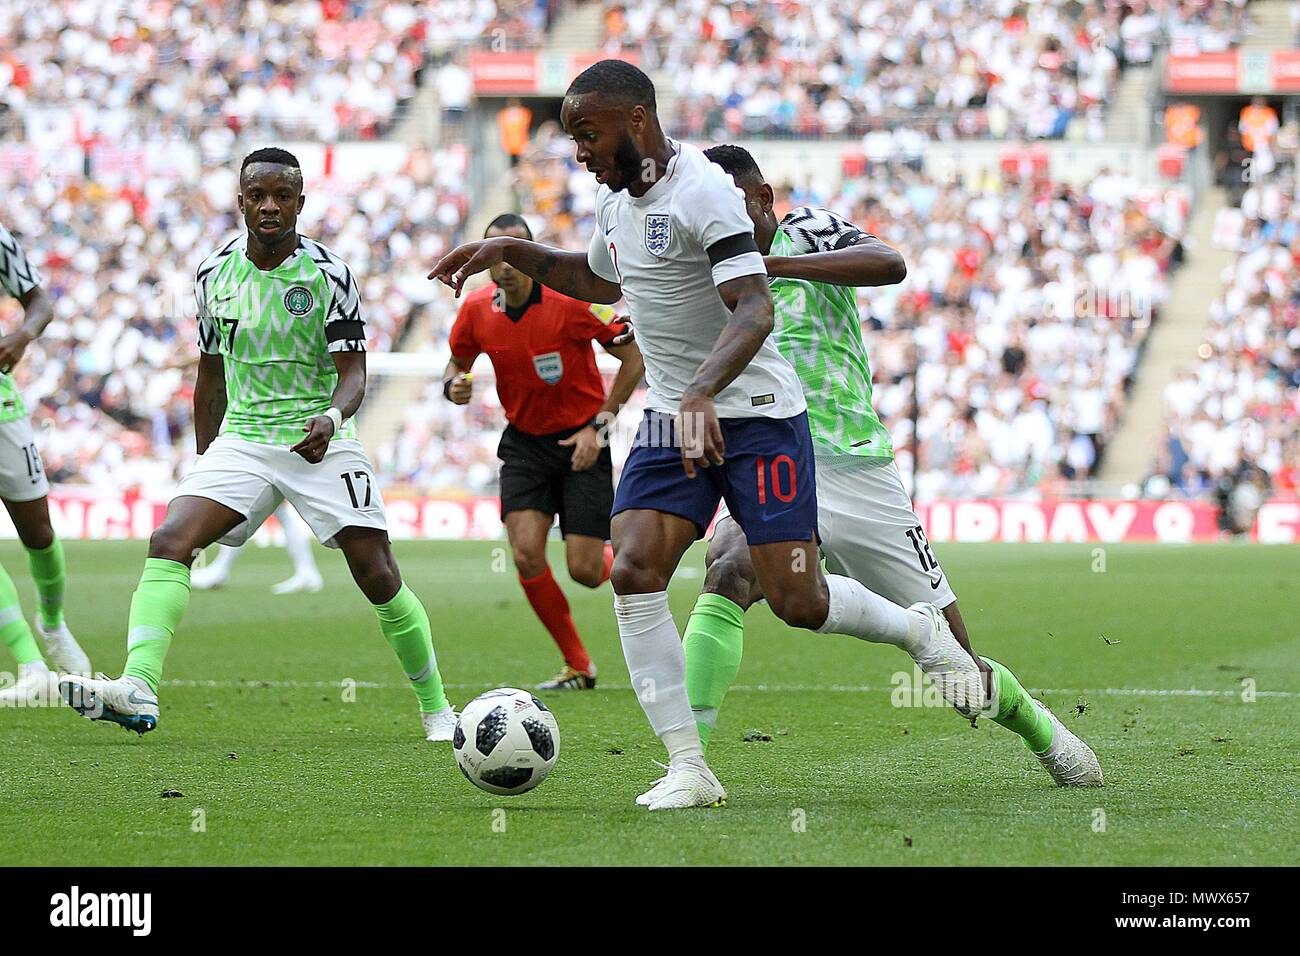 London, UK. 2nd June 2018. London, UK. 2nd June 2018. Raheem Sterling of England goes past Shehu Abdullahi of Nigeria during the International Friendly match between England and Nigeria at Wembley Stadium on June 2nd 2018 in London, England. (Photo by Matt Bradshaw/phcimages.com) Credit: PHC Images/Alamy Live News Stock Photo